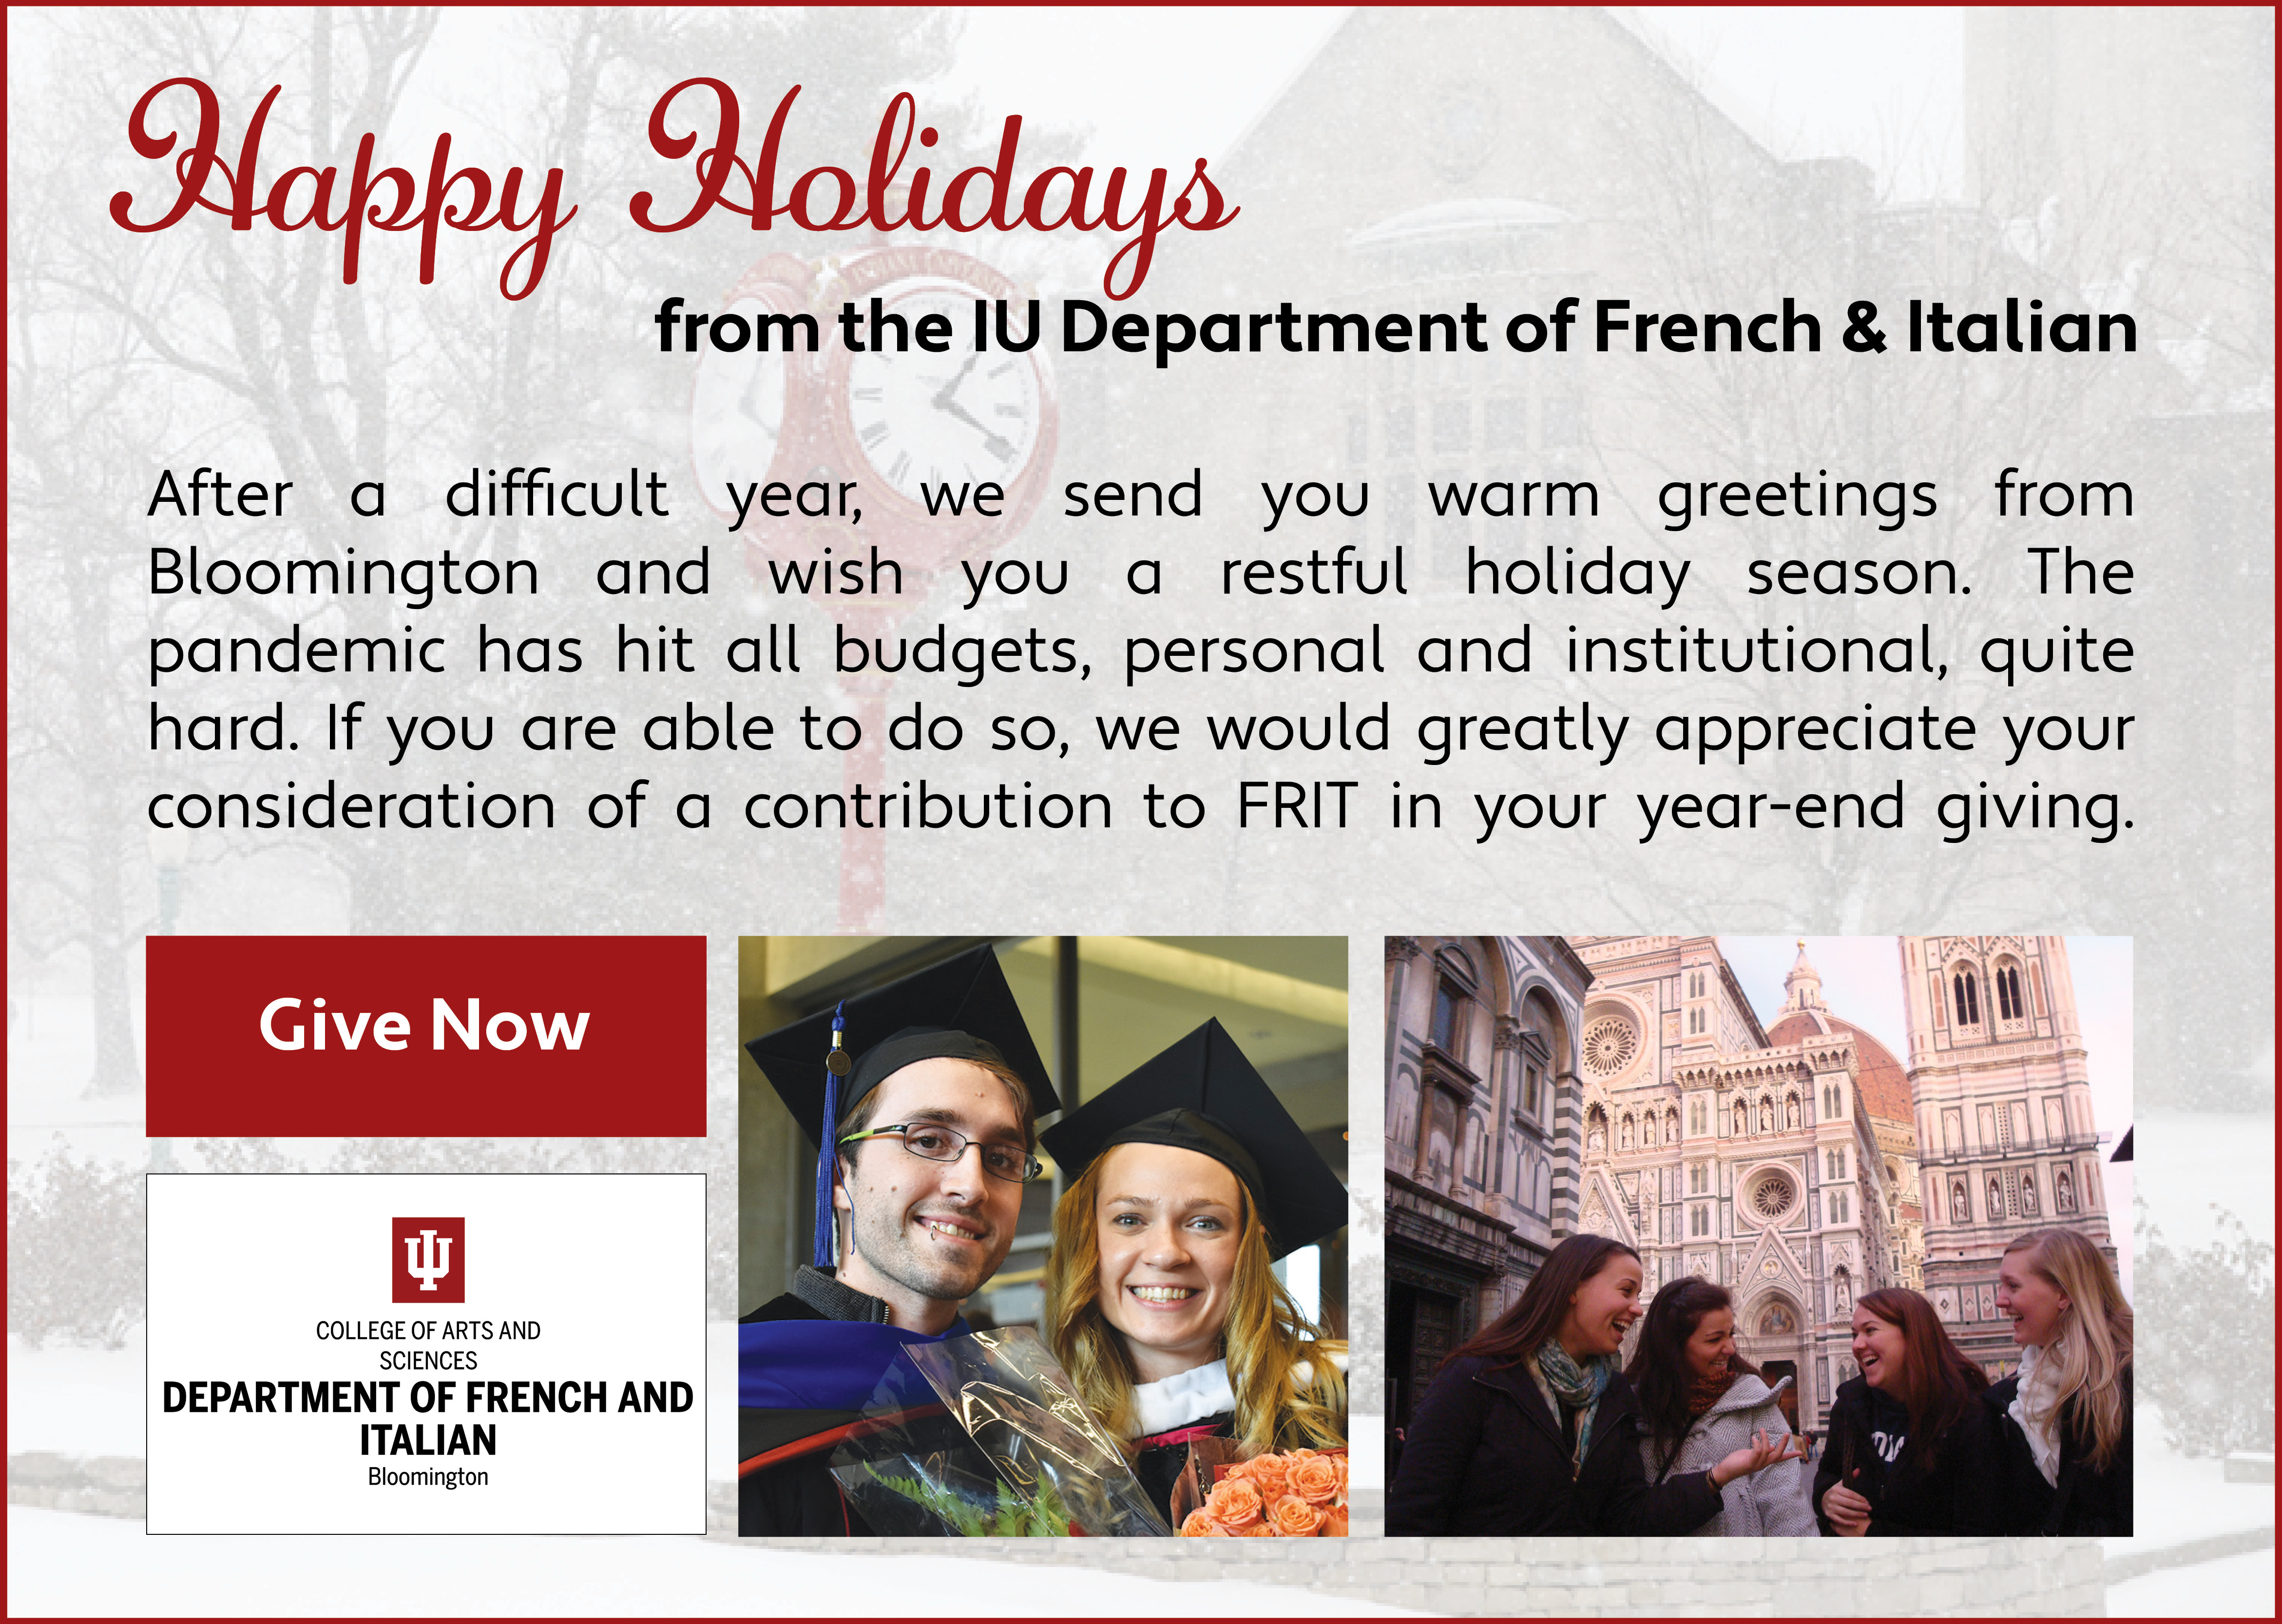 Happy Holiday from the Indiana University Department of French and Italian.